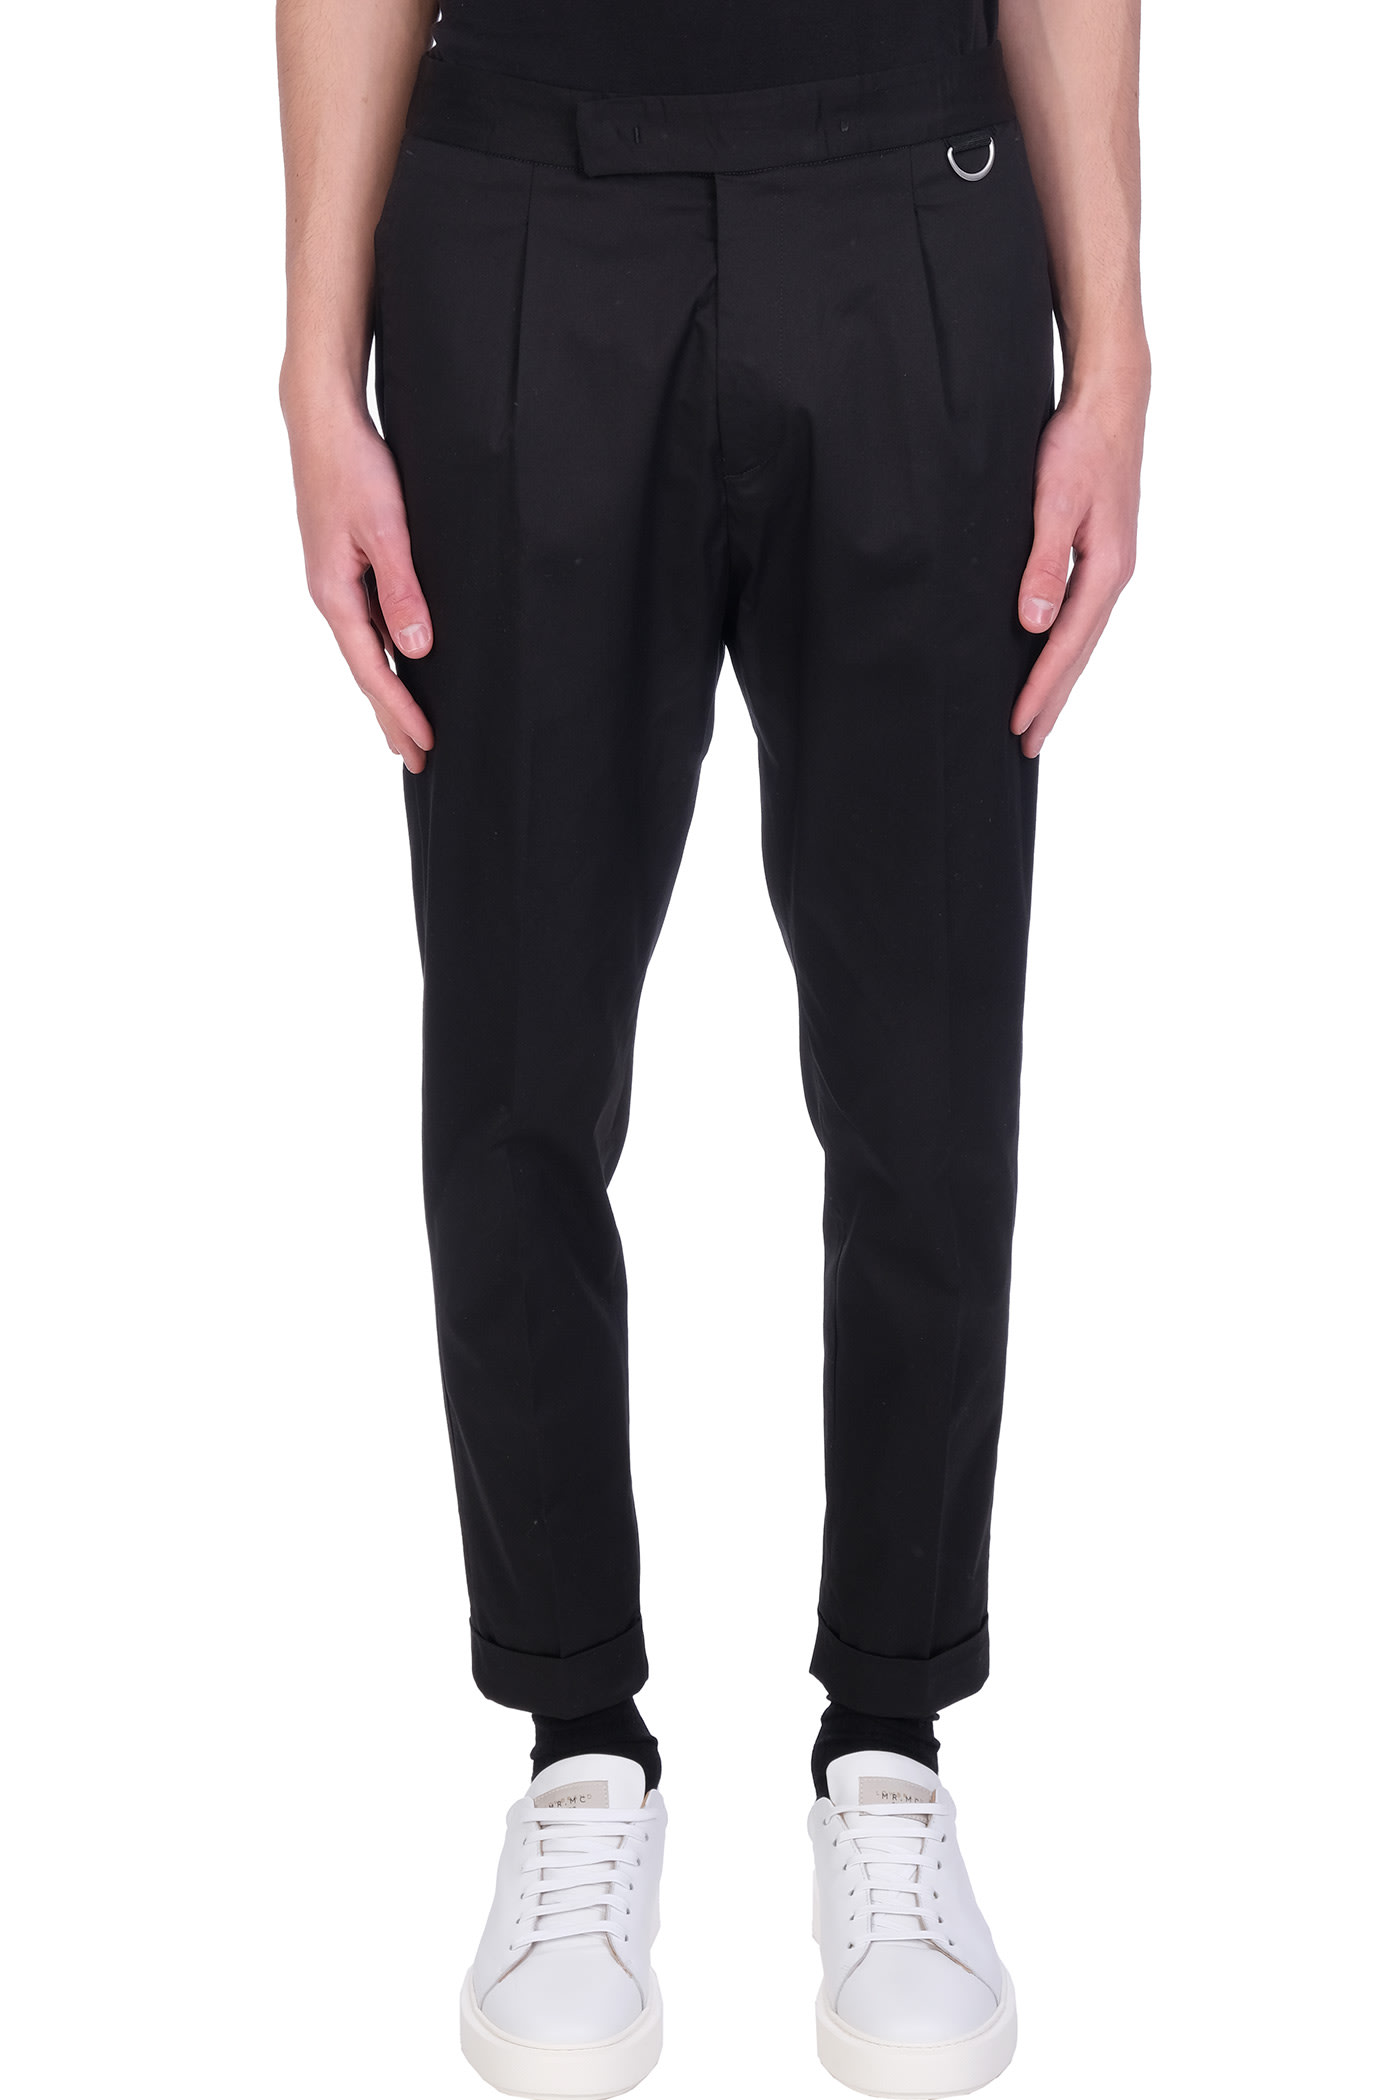 Low Brand Pants In Black Cotton